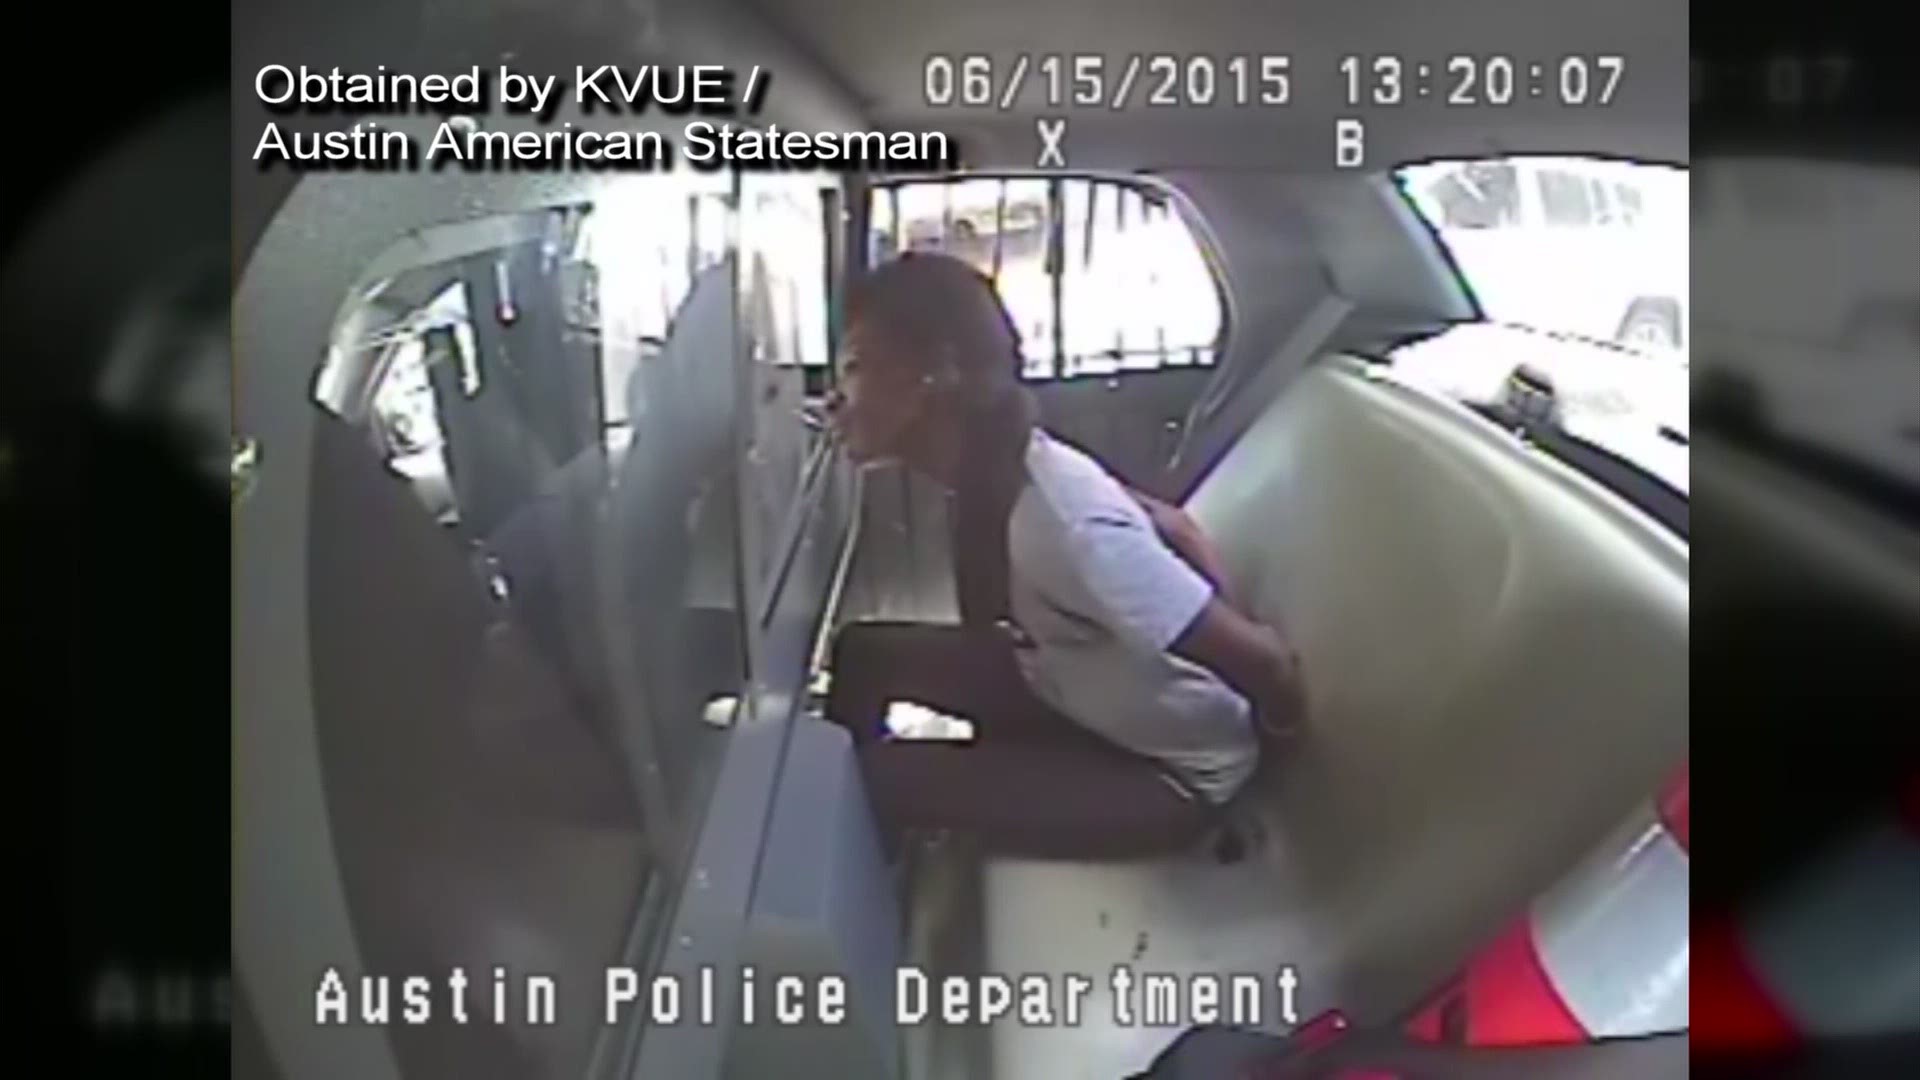 Police video of Breaion King being transported to jail after being arrested June 15, 2015.